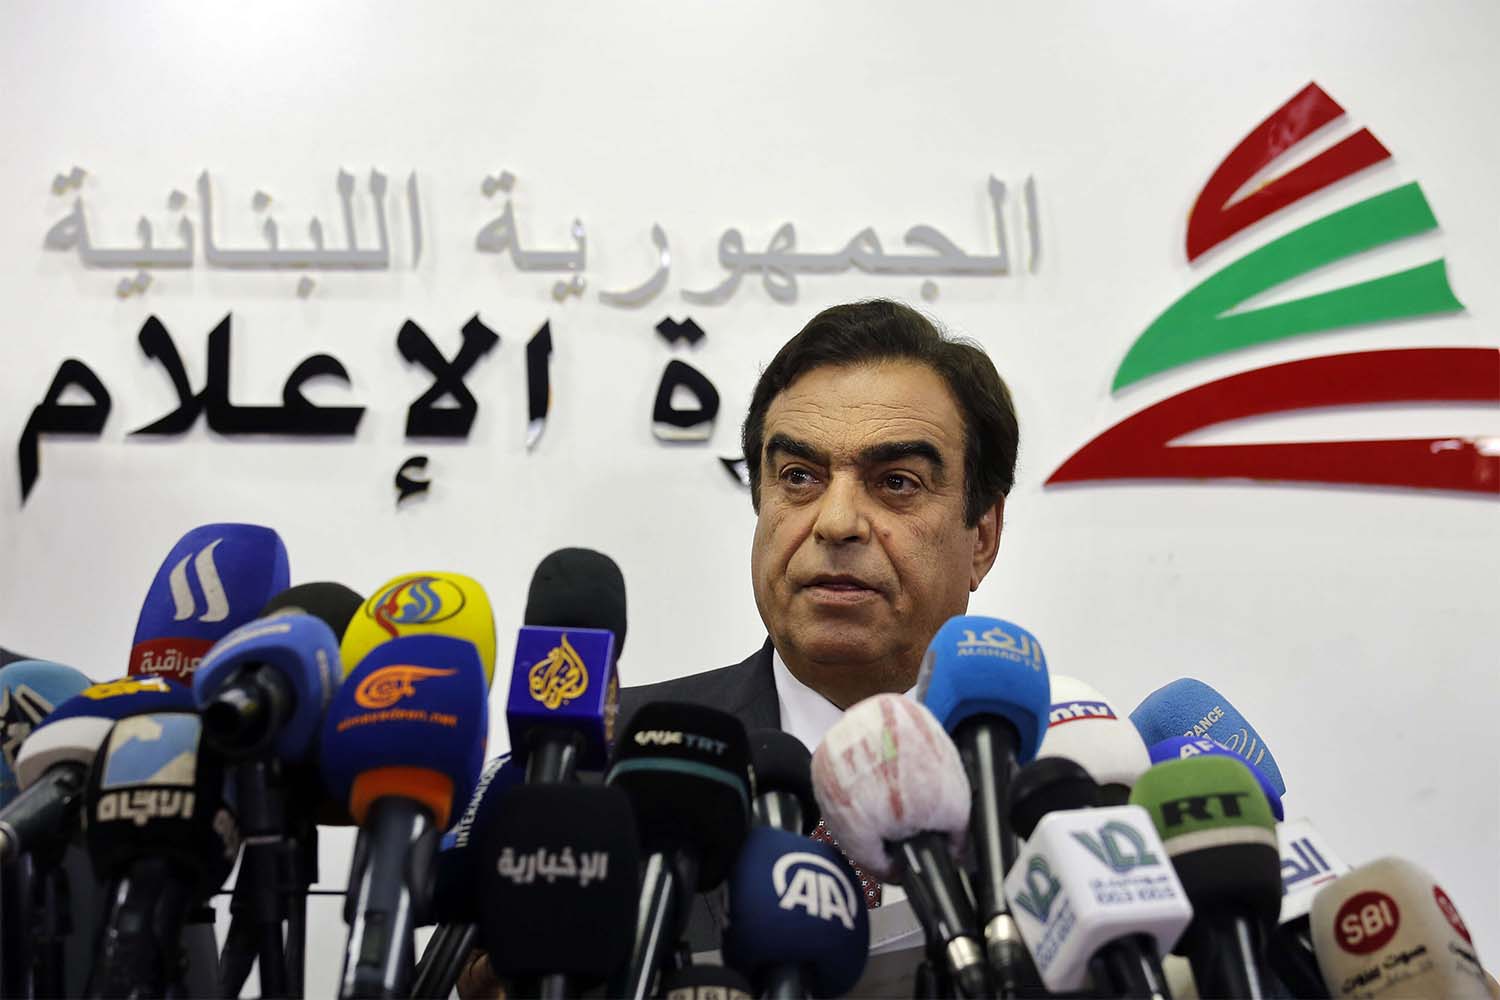 Will Kordahi's resignation help defuse the crisis with Gulf Arab countries?